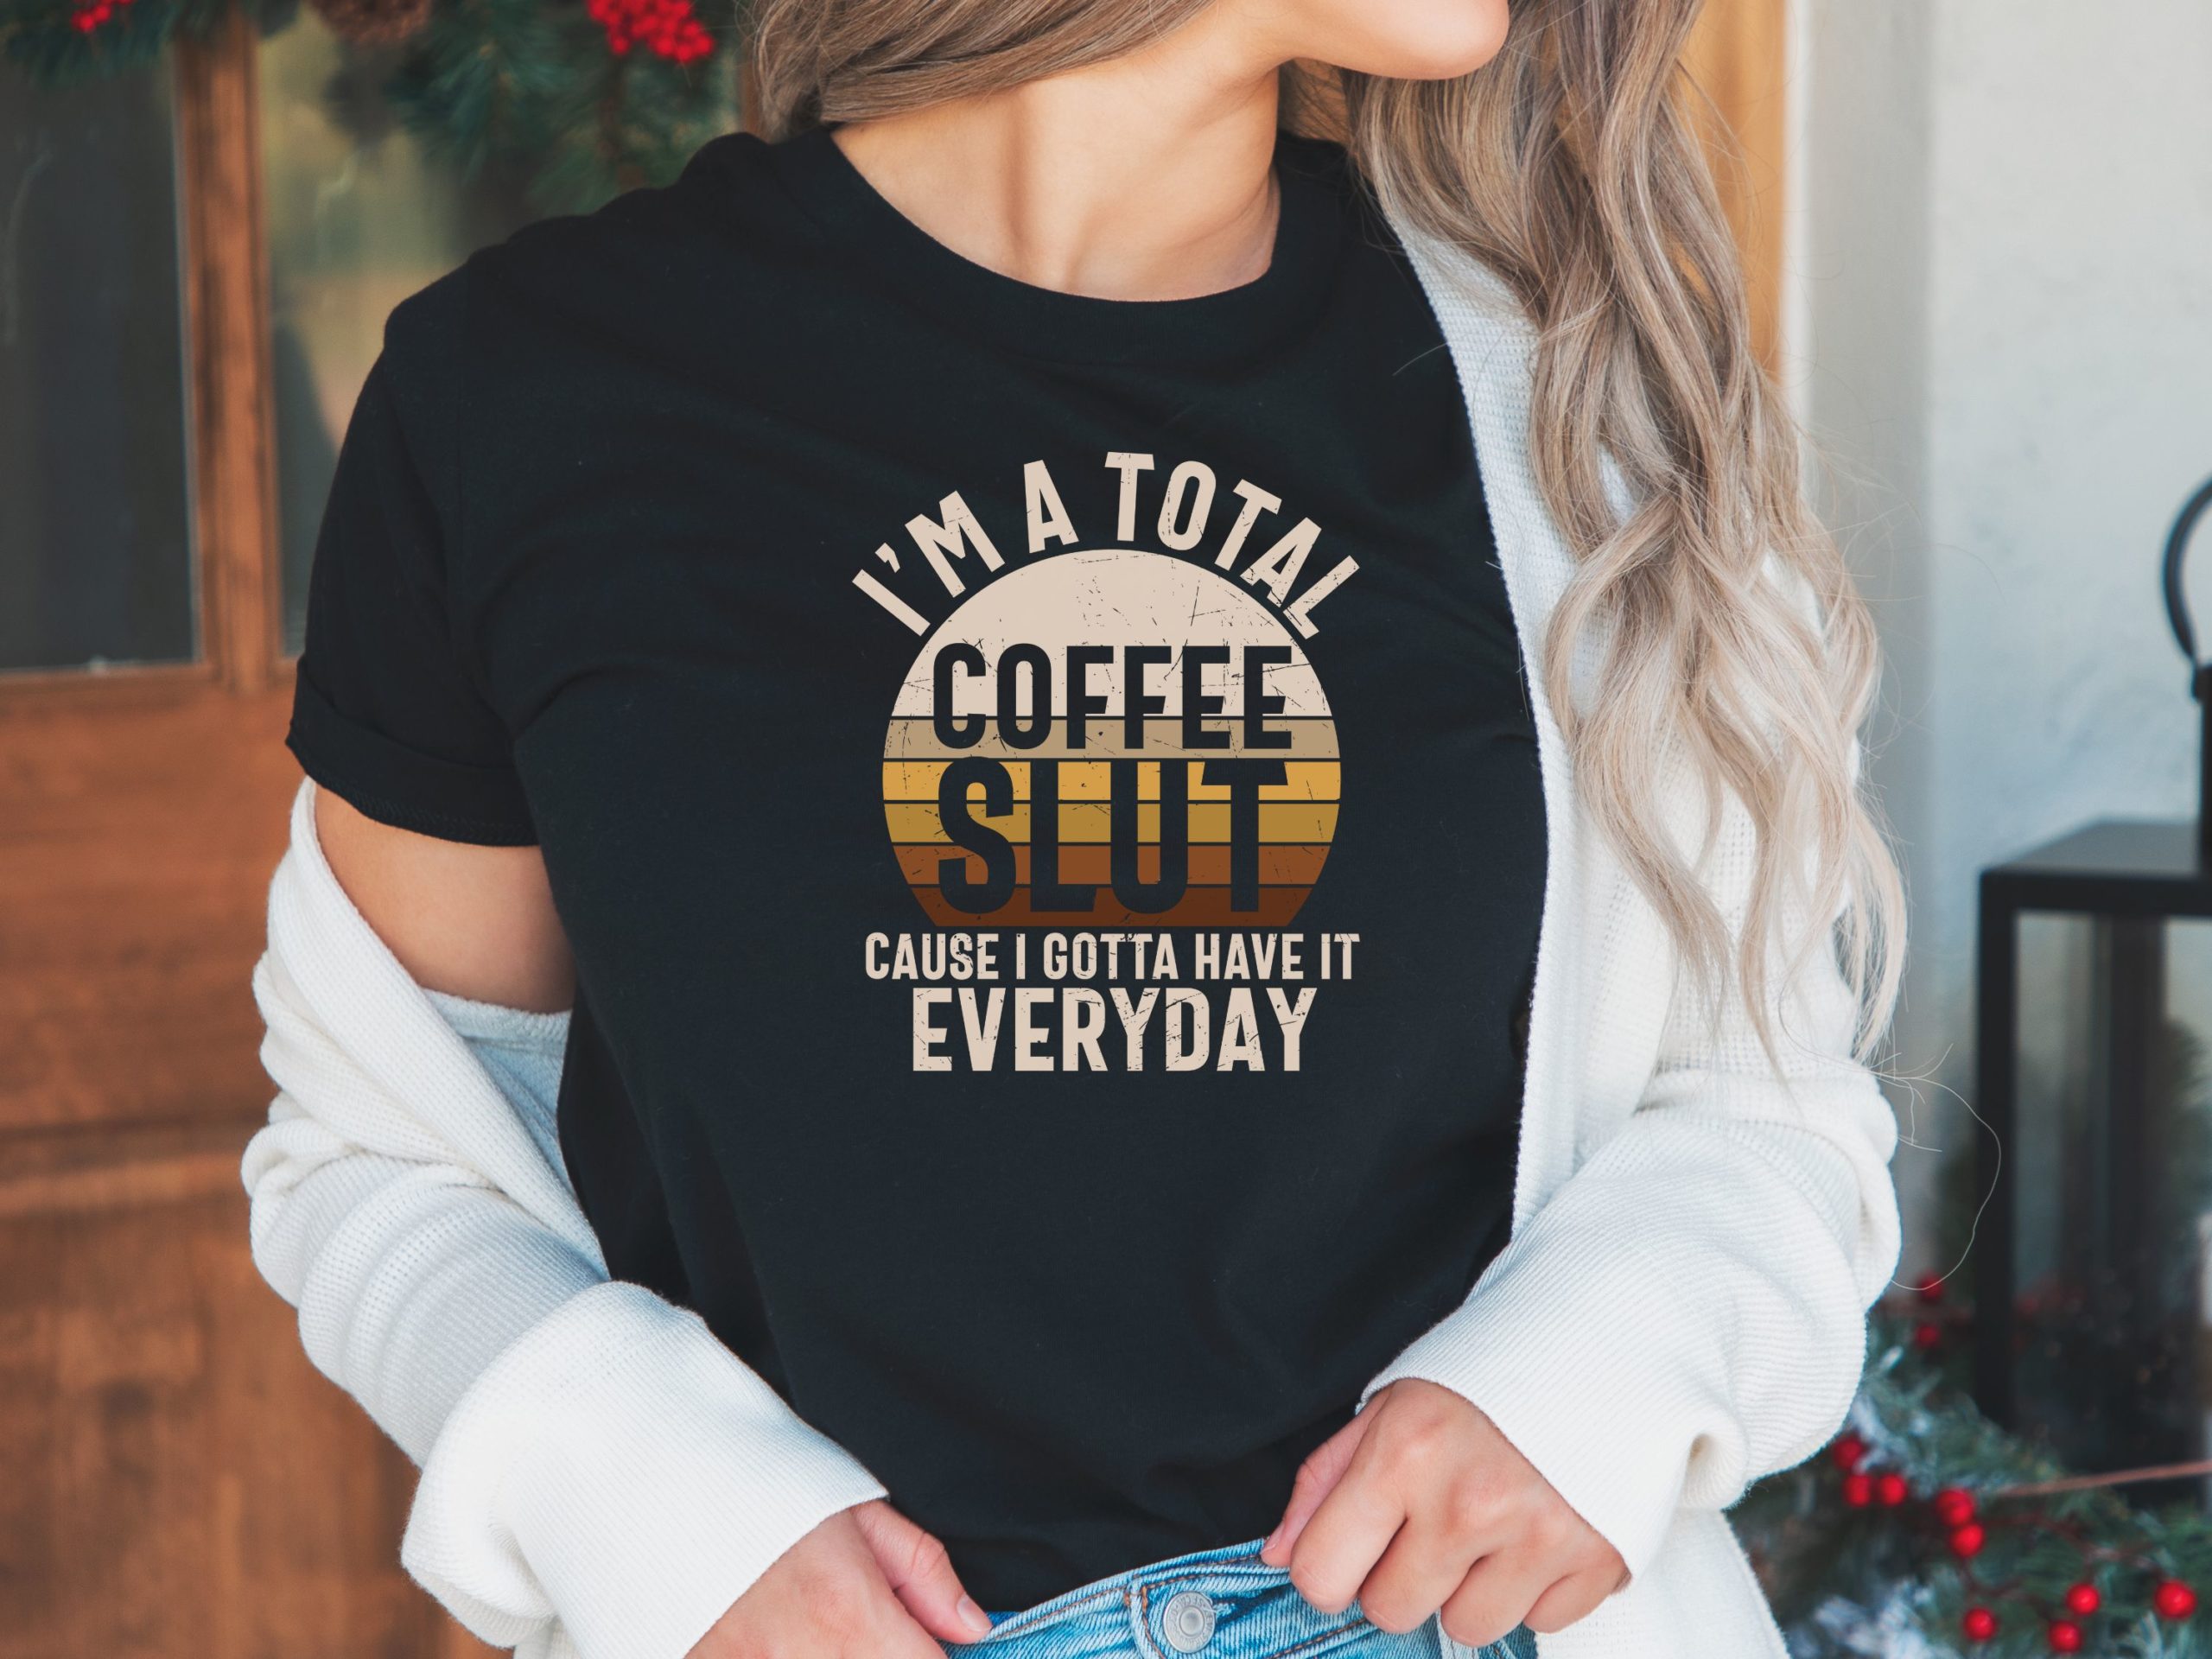 Coffee lover shirt, Gift for coffee drinker